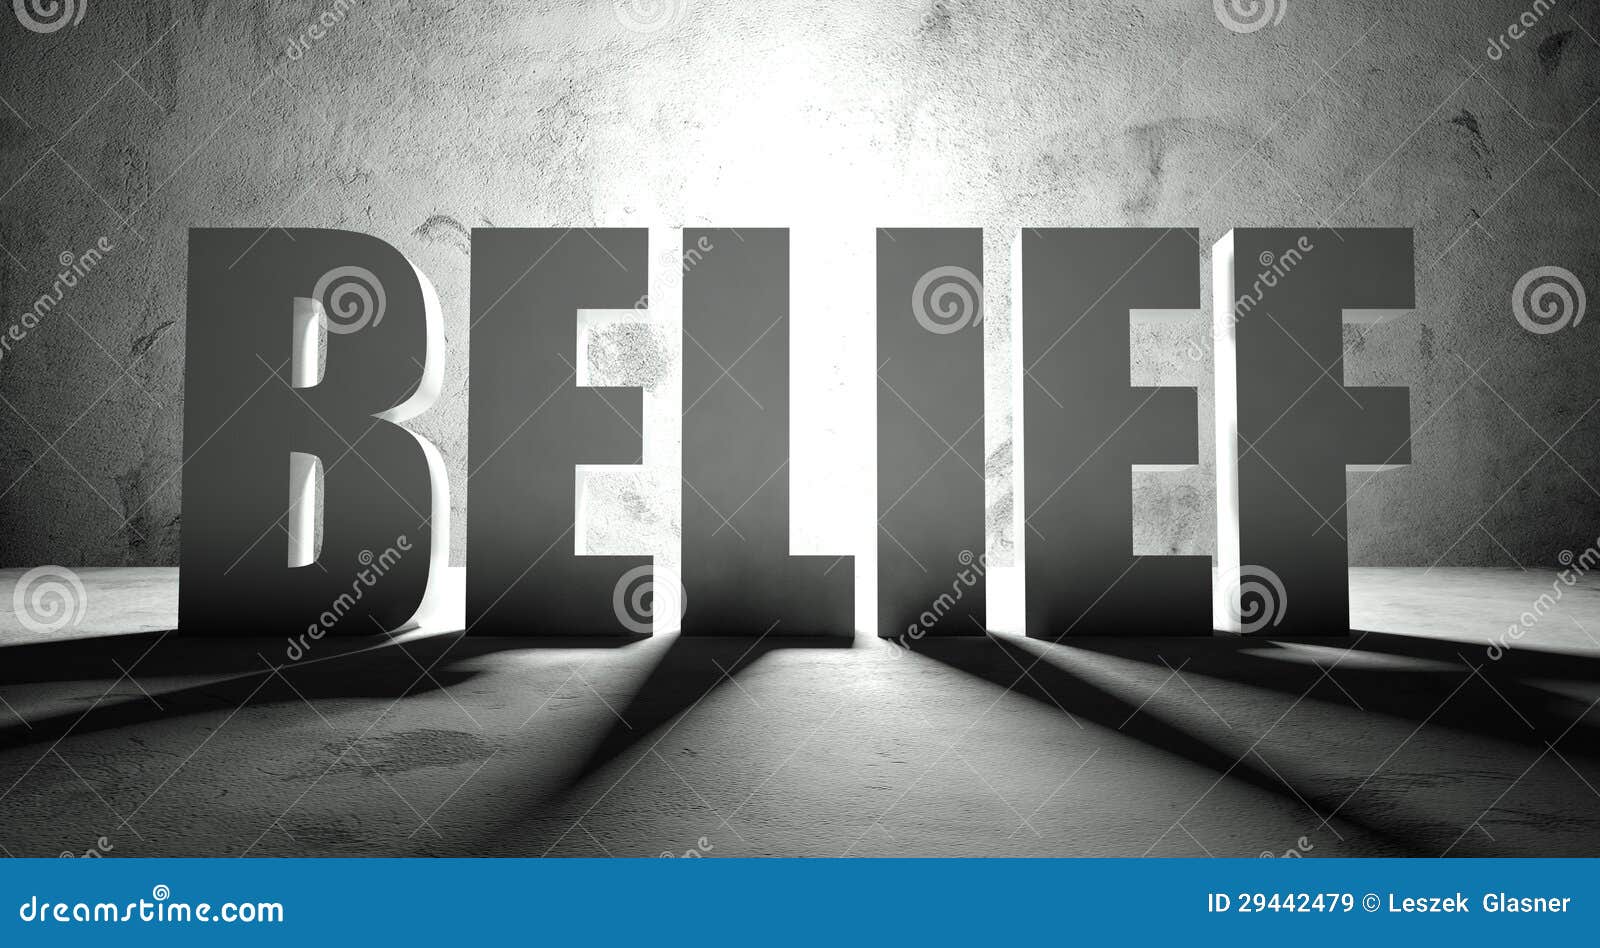 belief word with shadow, background